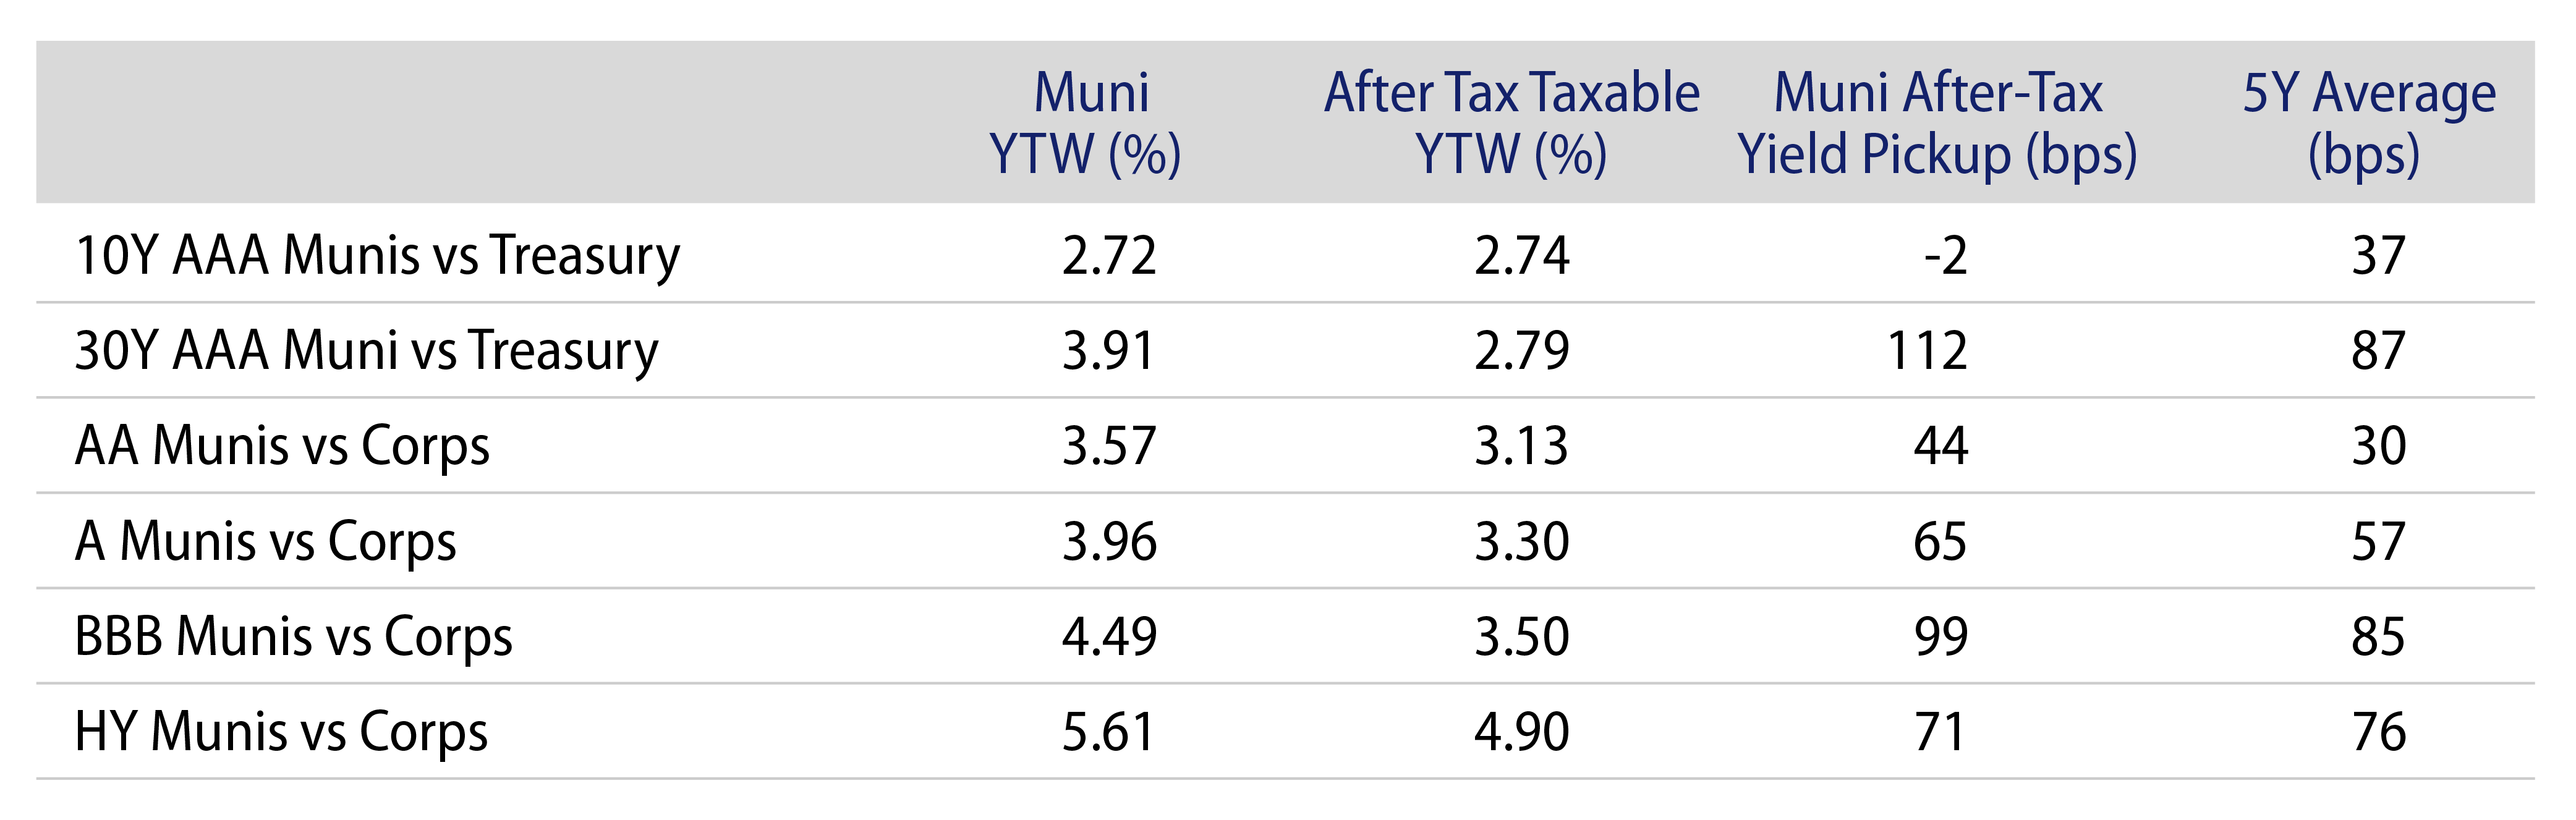 Municipal vs. Taxable Fixed-Income Yields by Quality